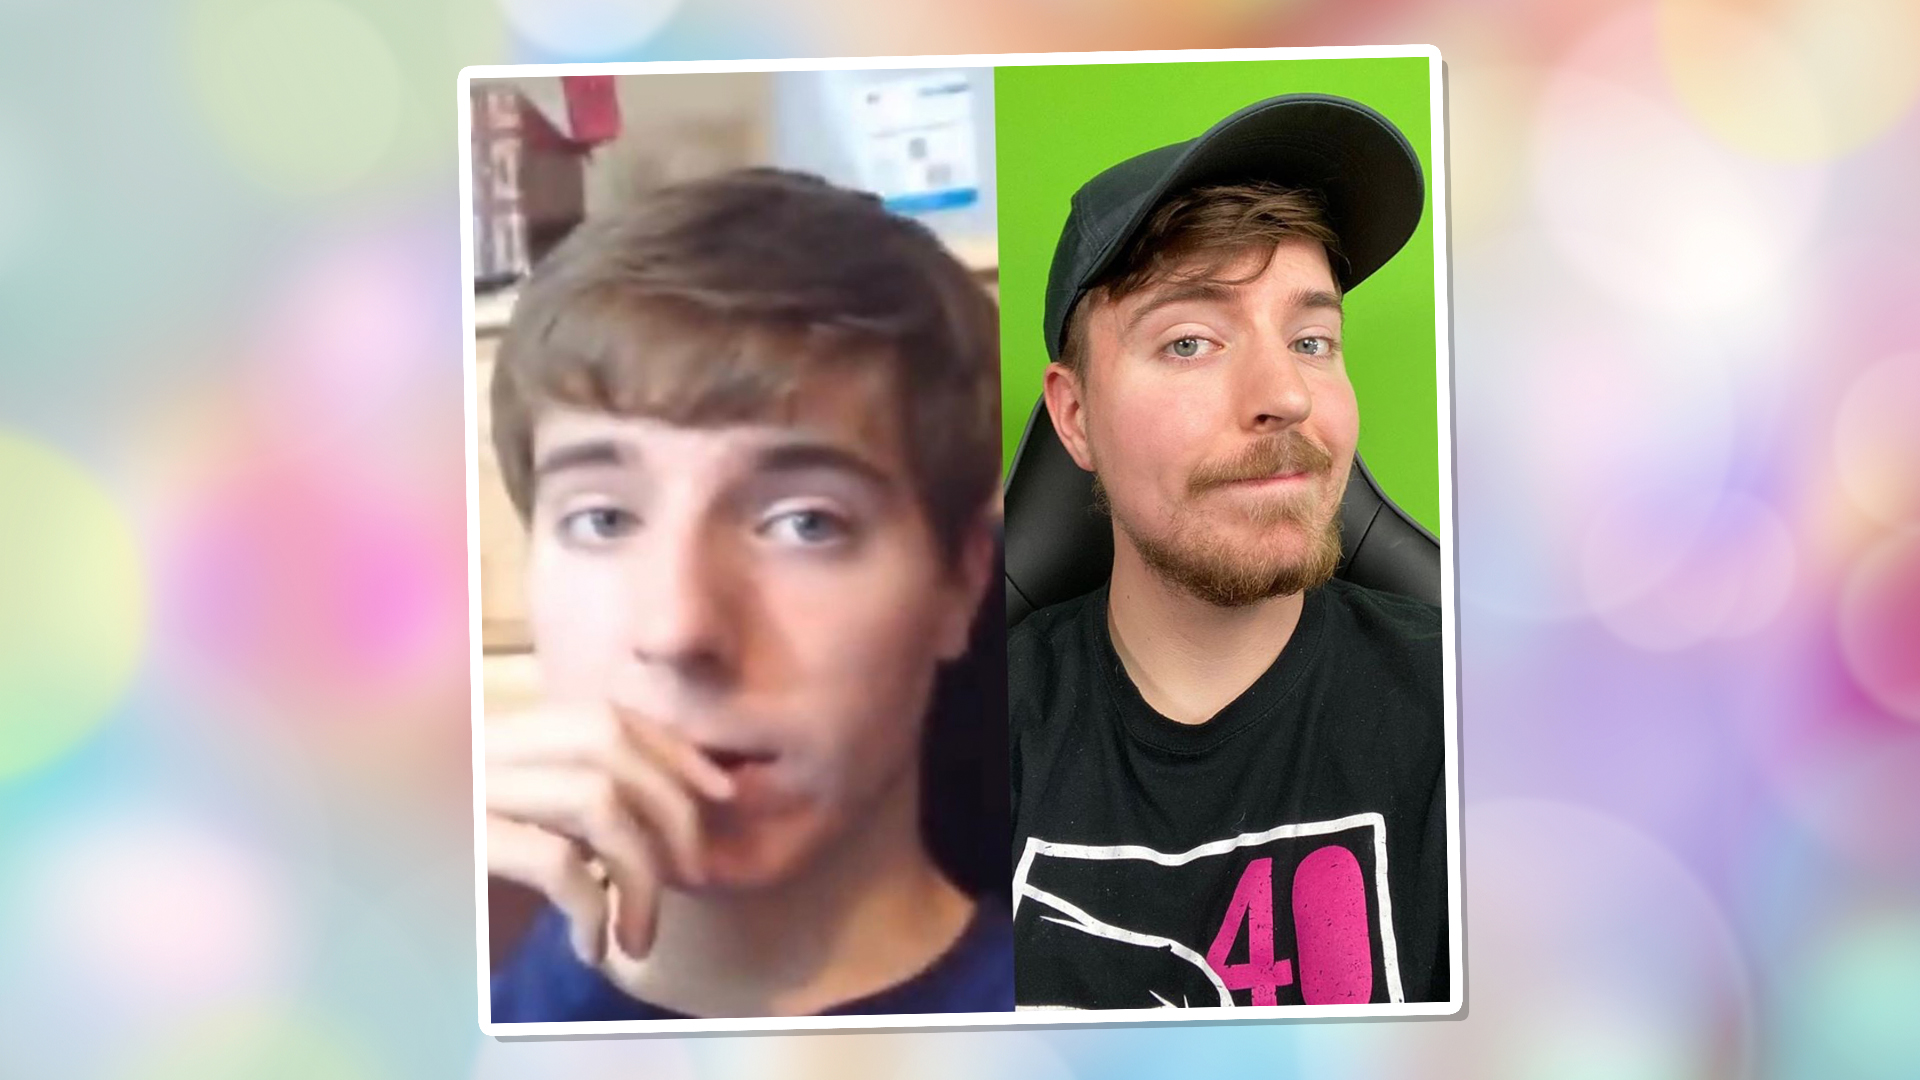 MrBeast then and now